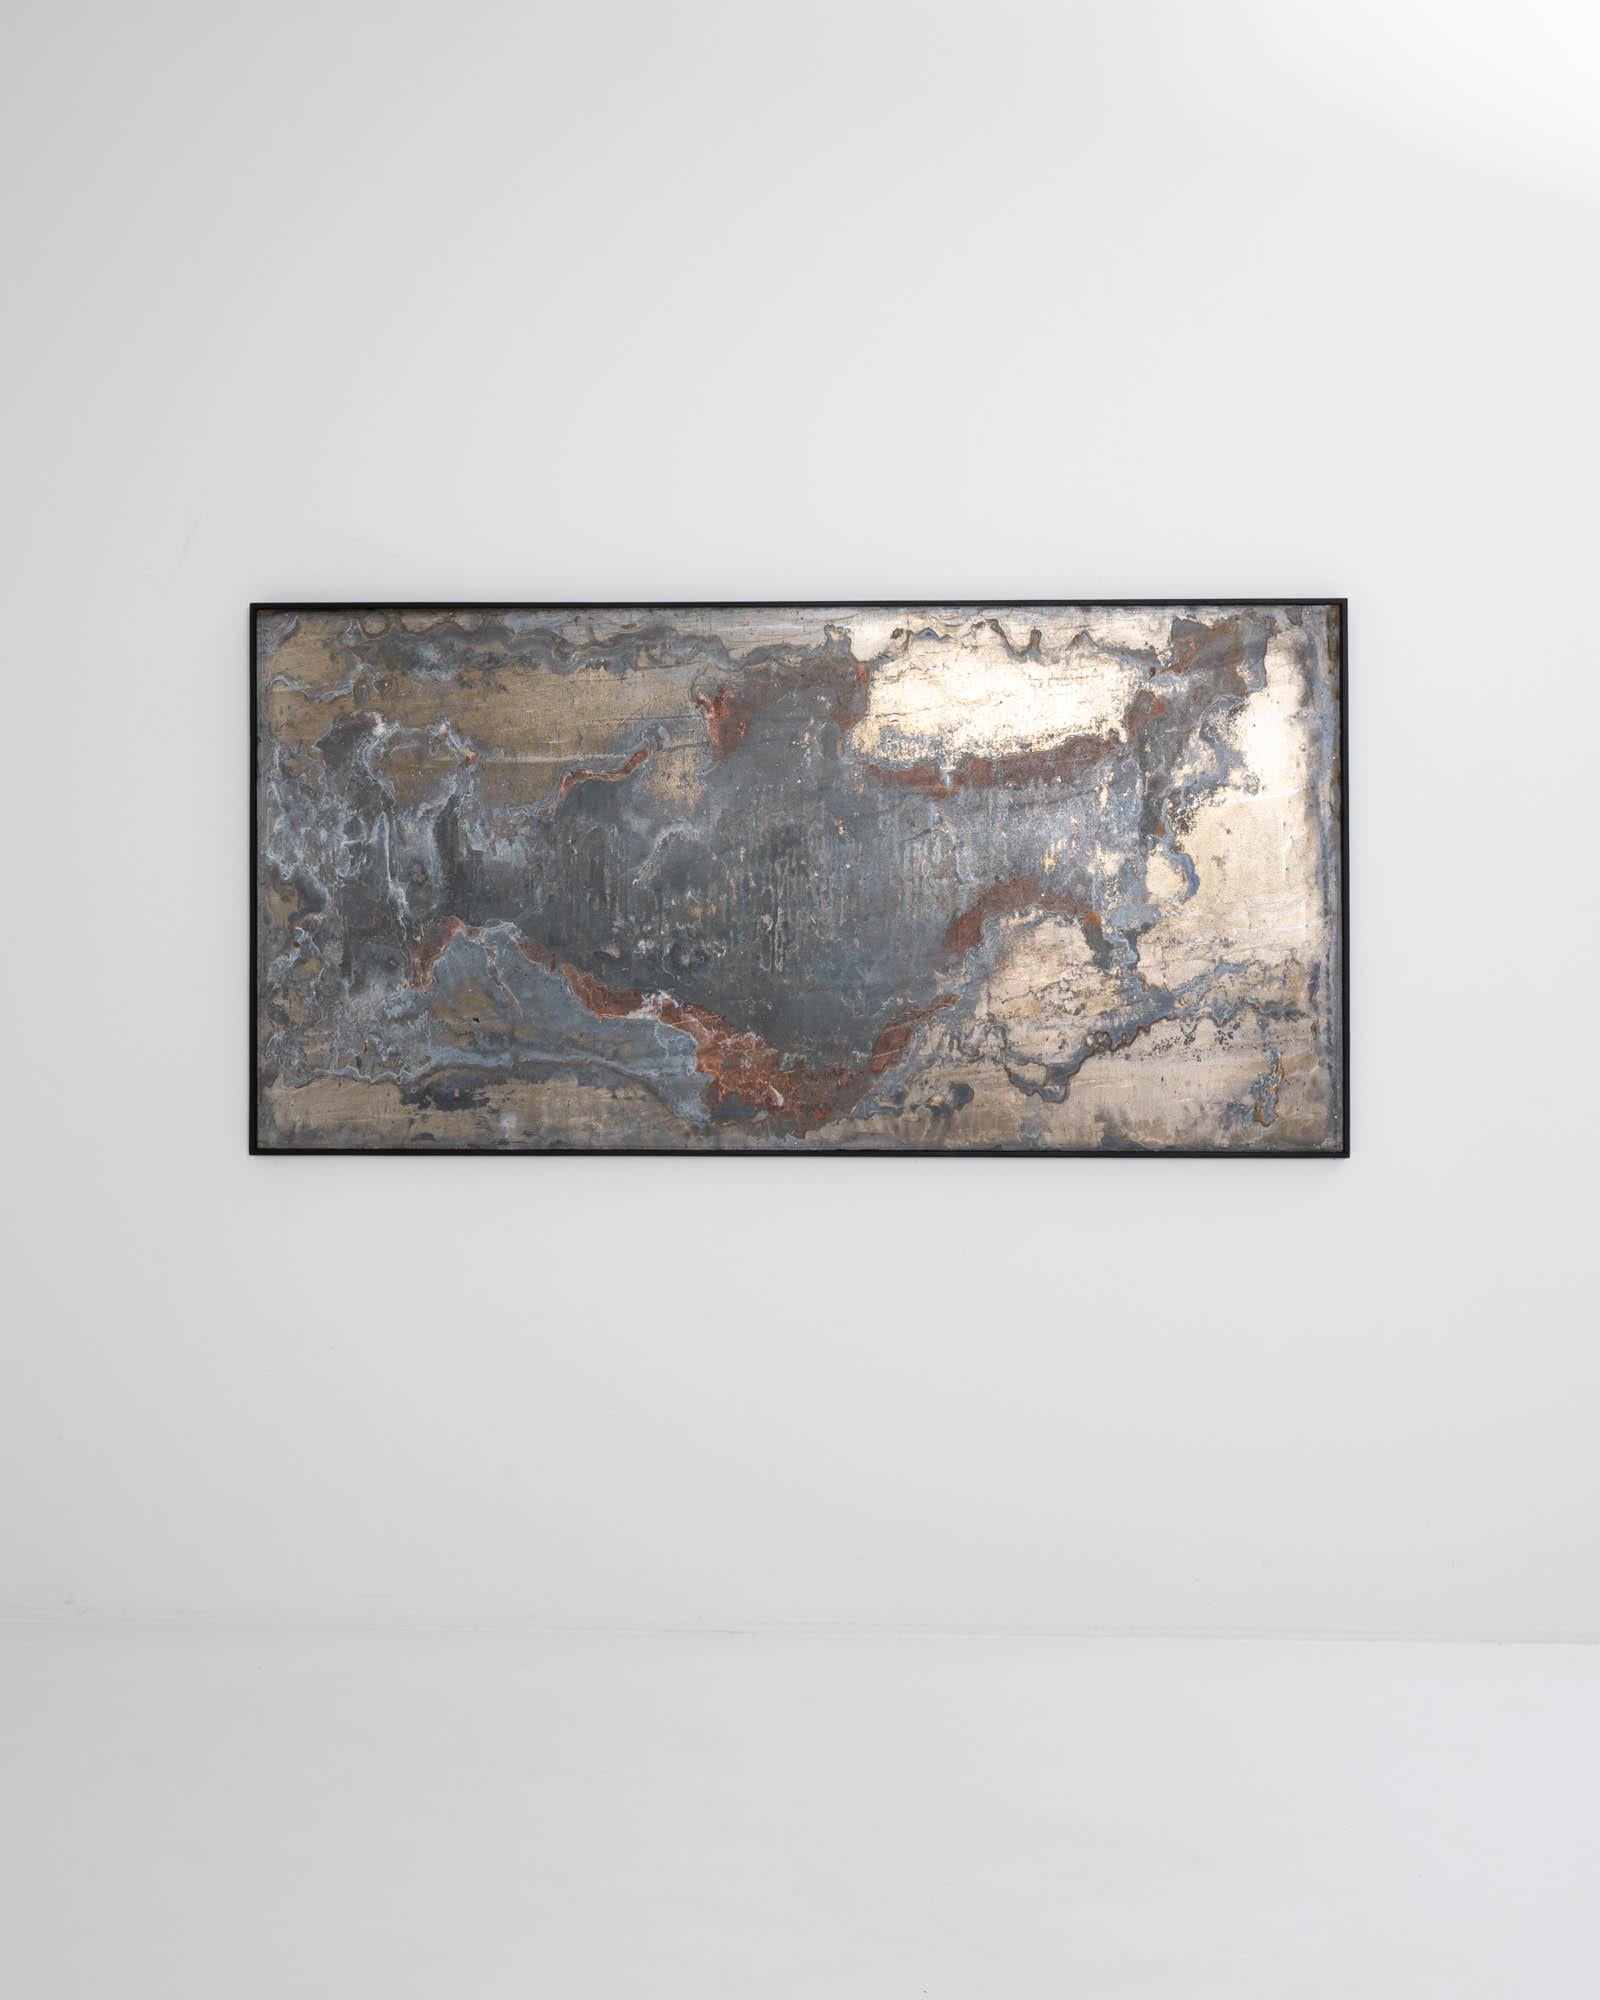 Bold and enigmatic, this large-scale abstract artwork combines the hand of man and the hand of nature. The form has a minimalist simplicity: a broad sheet of metal is set within a wooden frame. The surface of the metal combines human